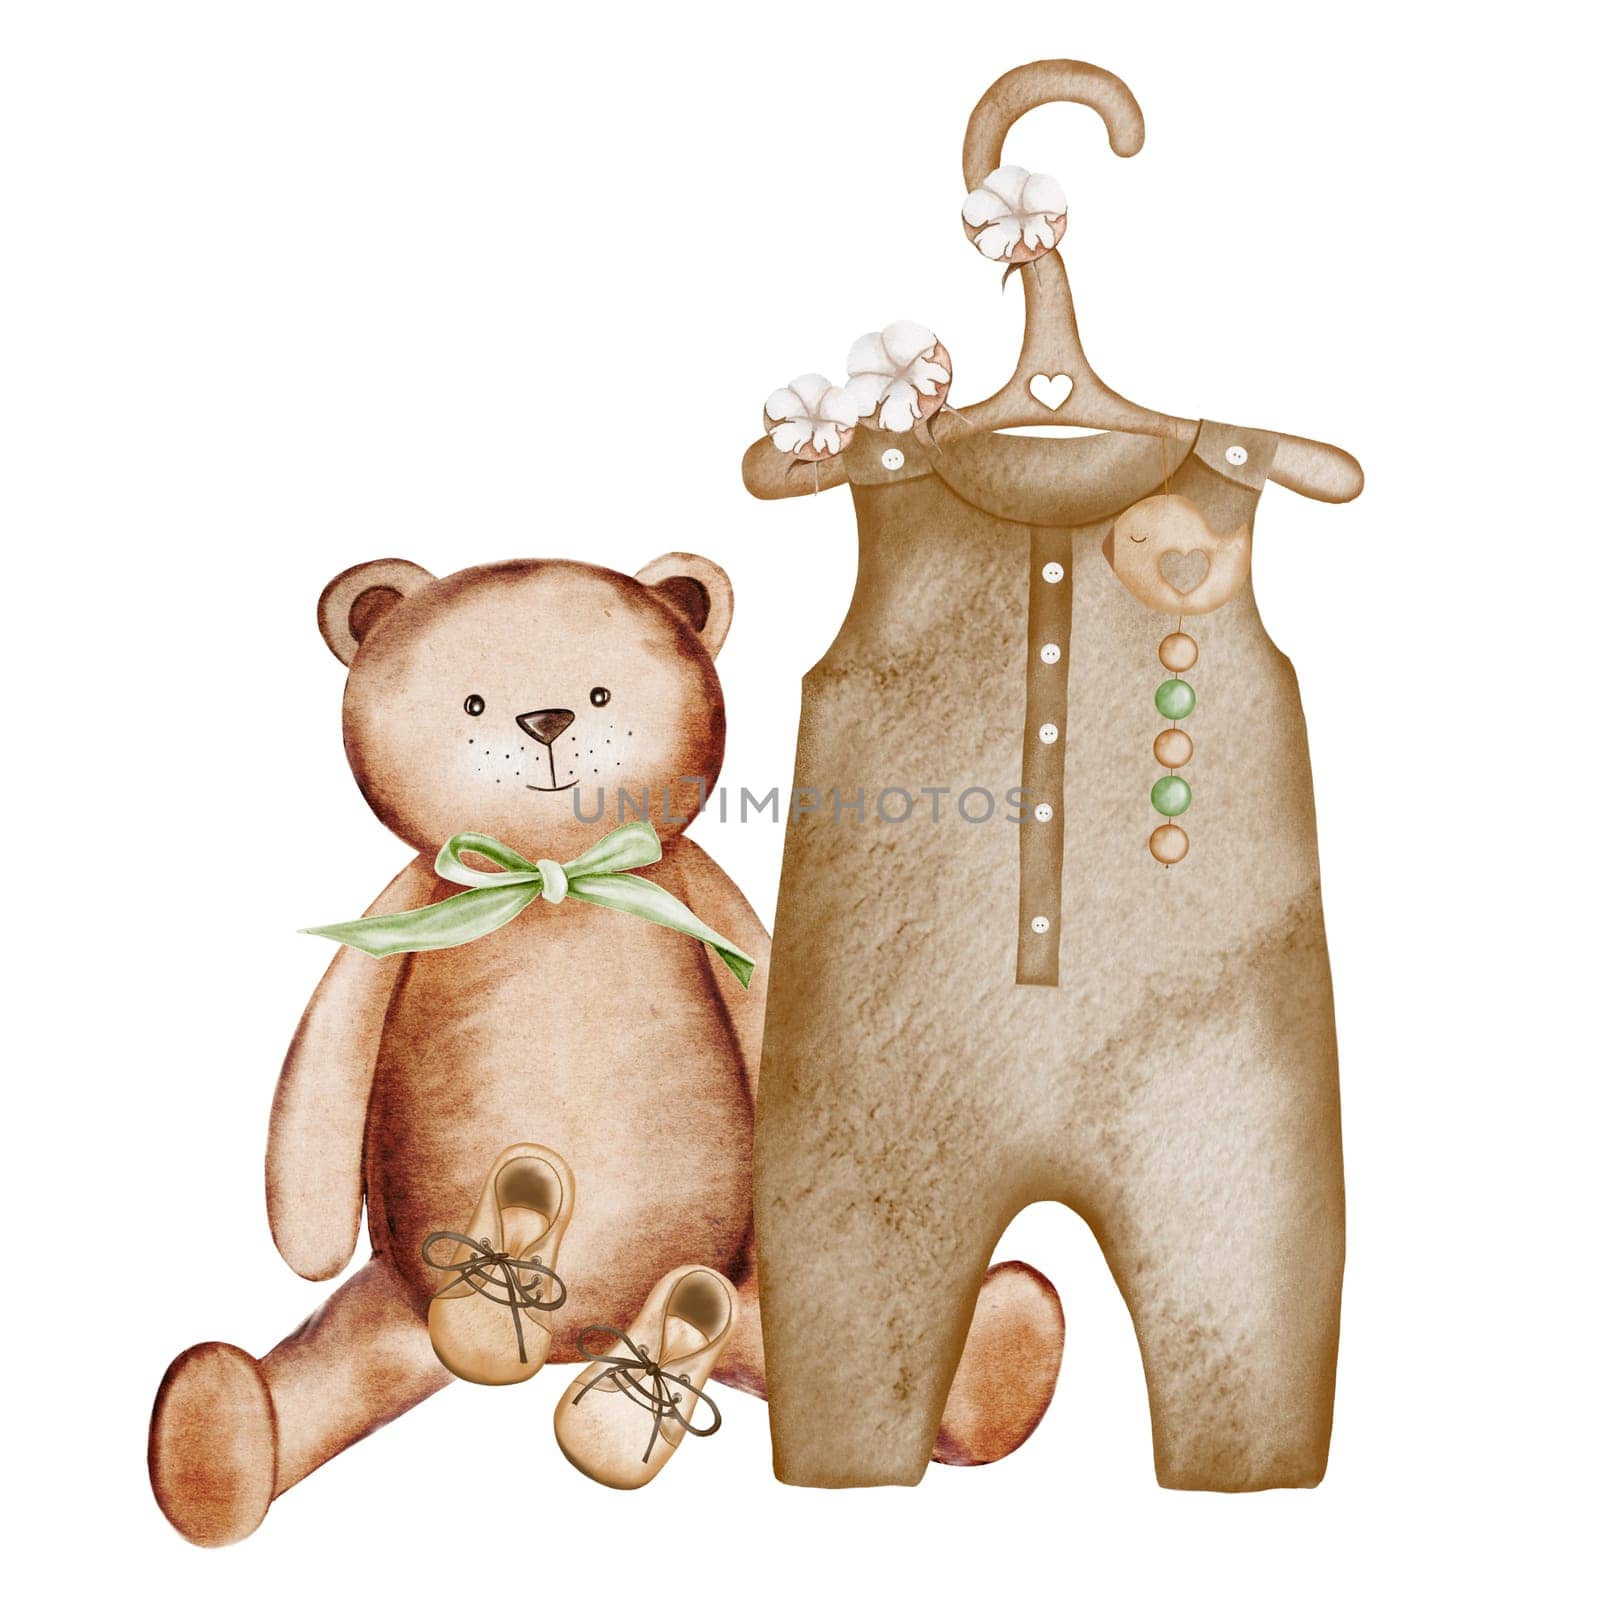 Cute baby shower watercolor invitation card. Composition of children's clothes on a hanger, a teddy bear and boots. Ideal for baby shower cards, clothing store tags, logos. High quality illustration